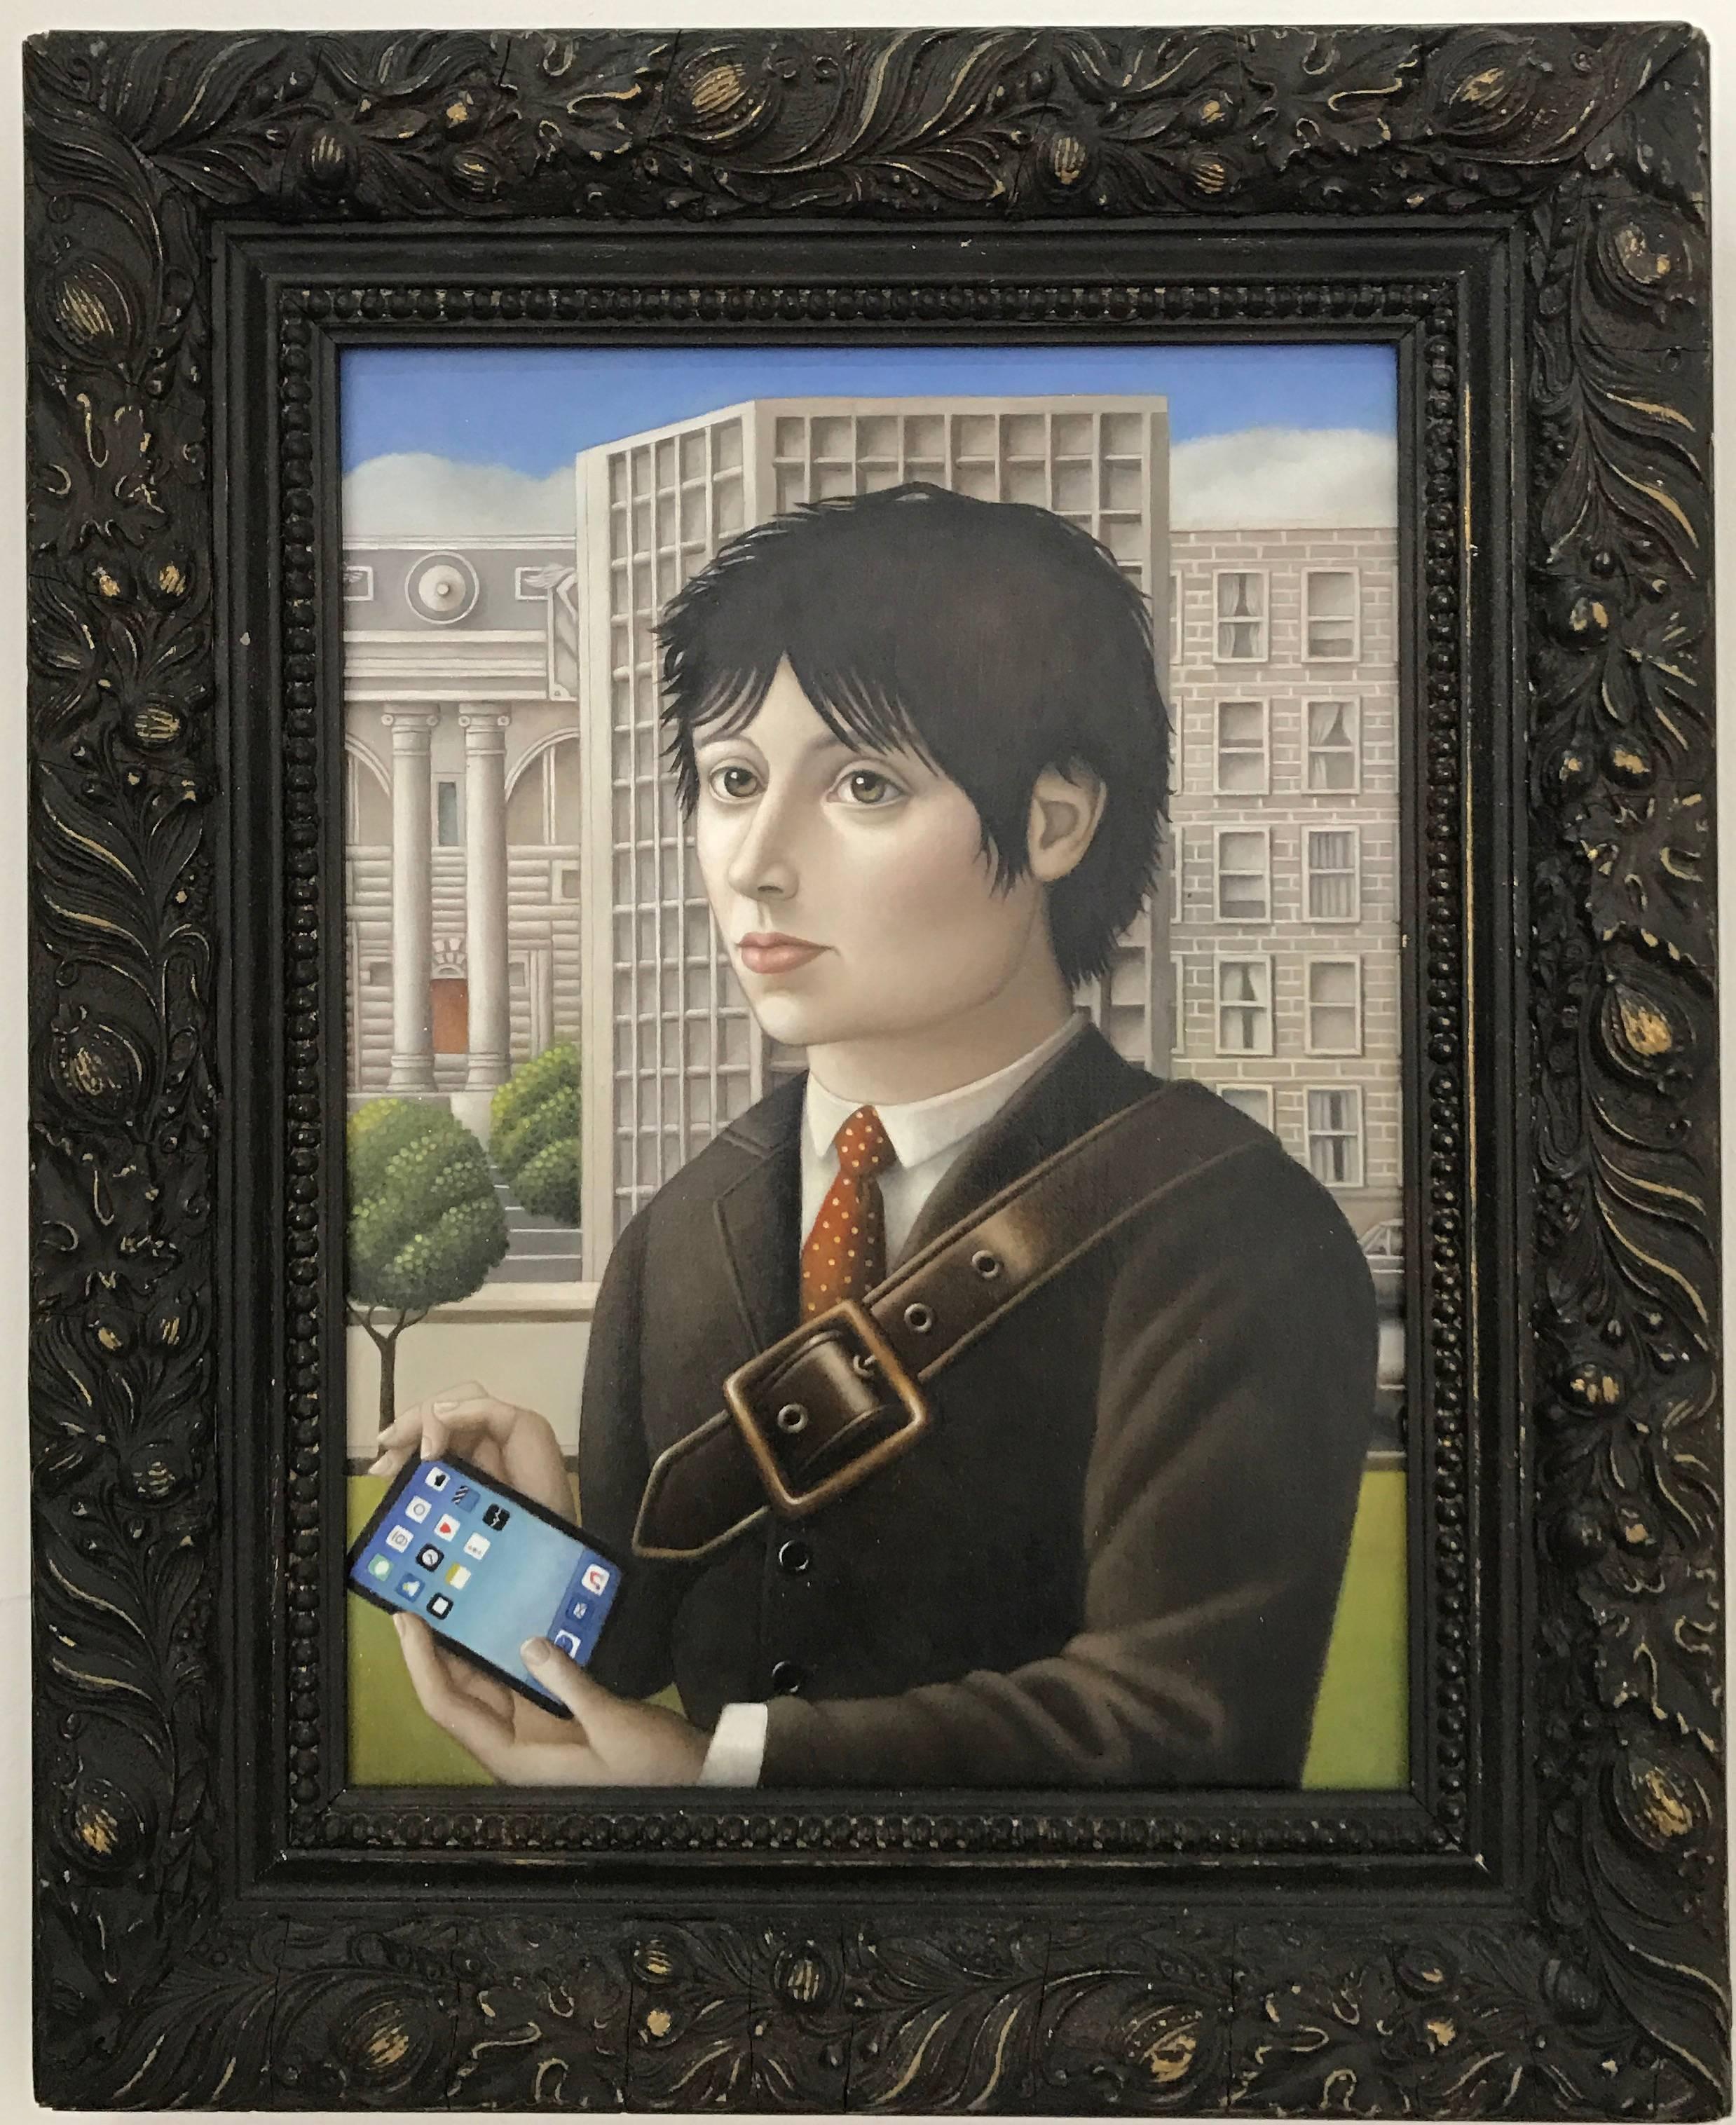 Amy Hill Figurative Painting - "Man with IPad" Contemporary Renaissnace Style Portrait, oil on panel, framed